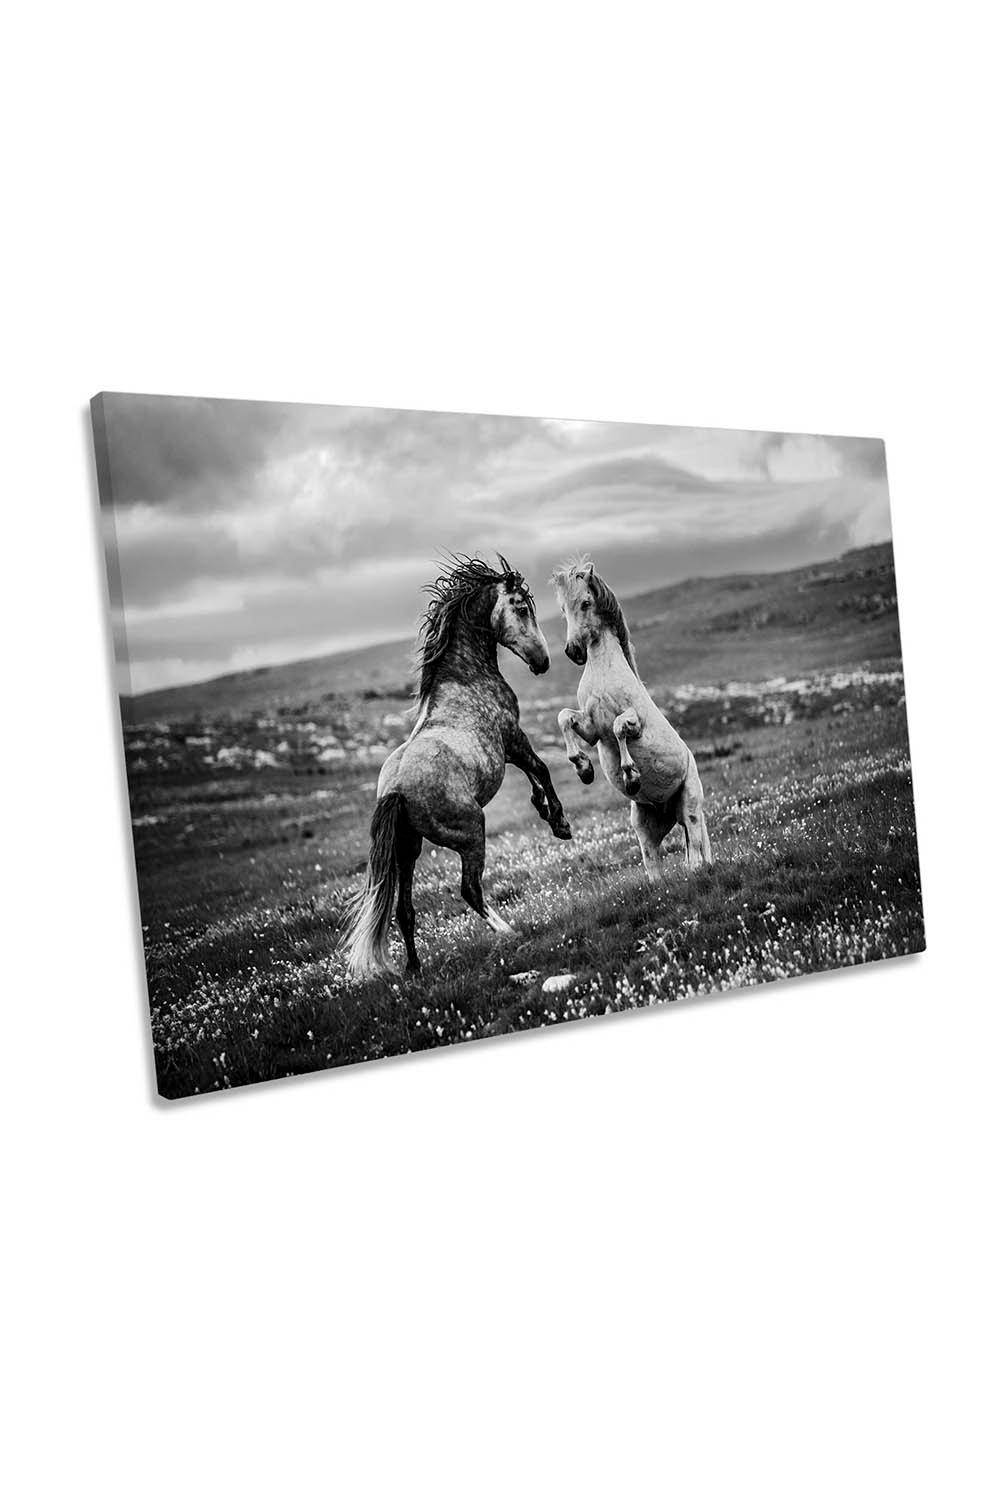 Wild and Free Horses Canvas Wall Art Picture Print